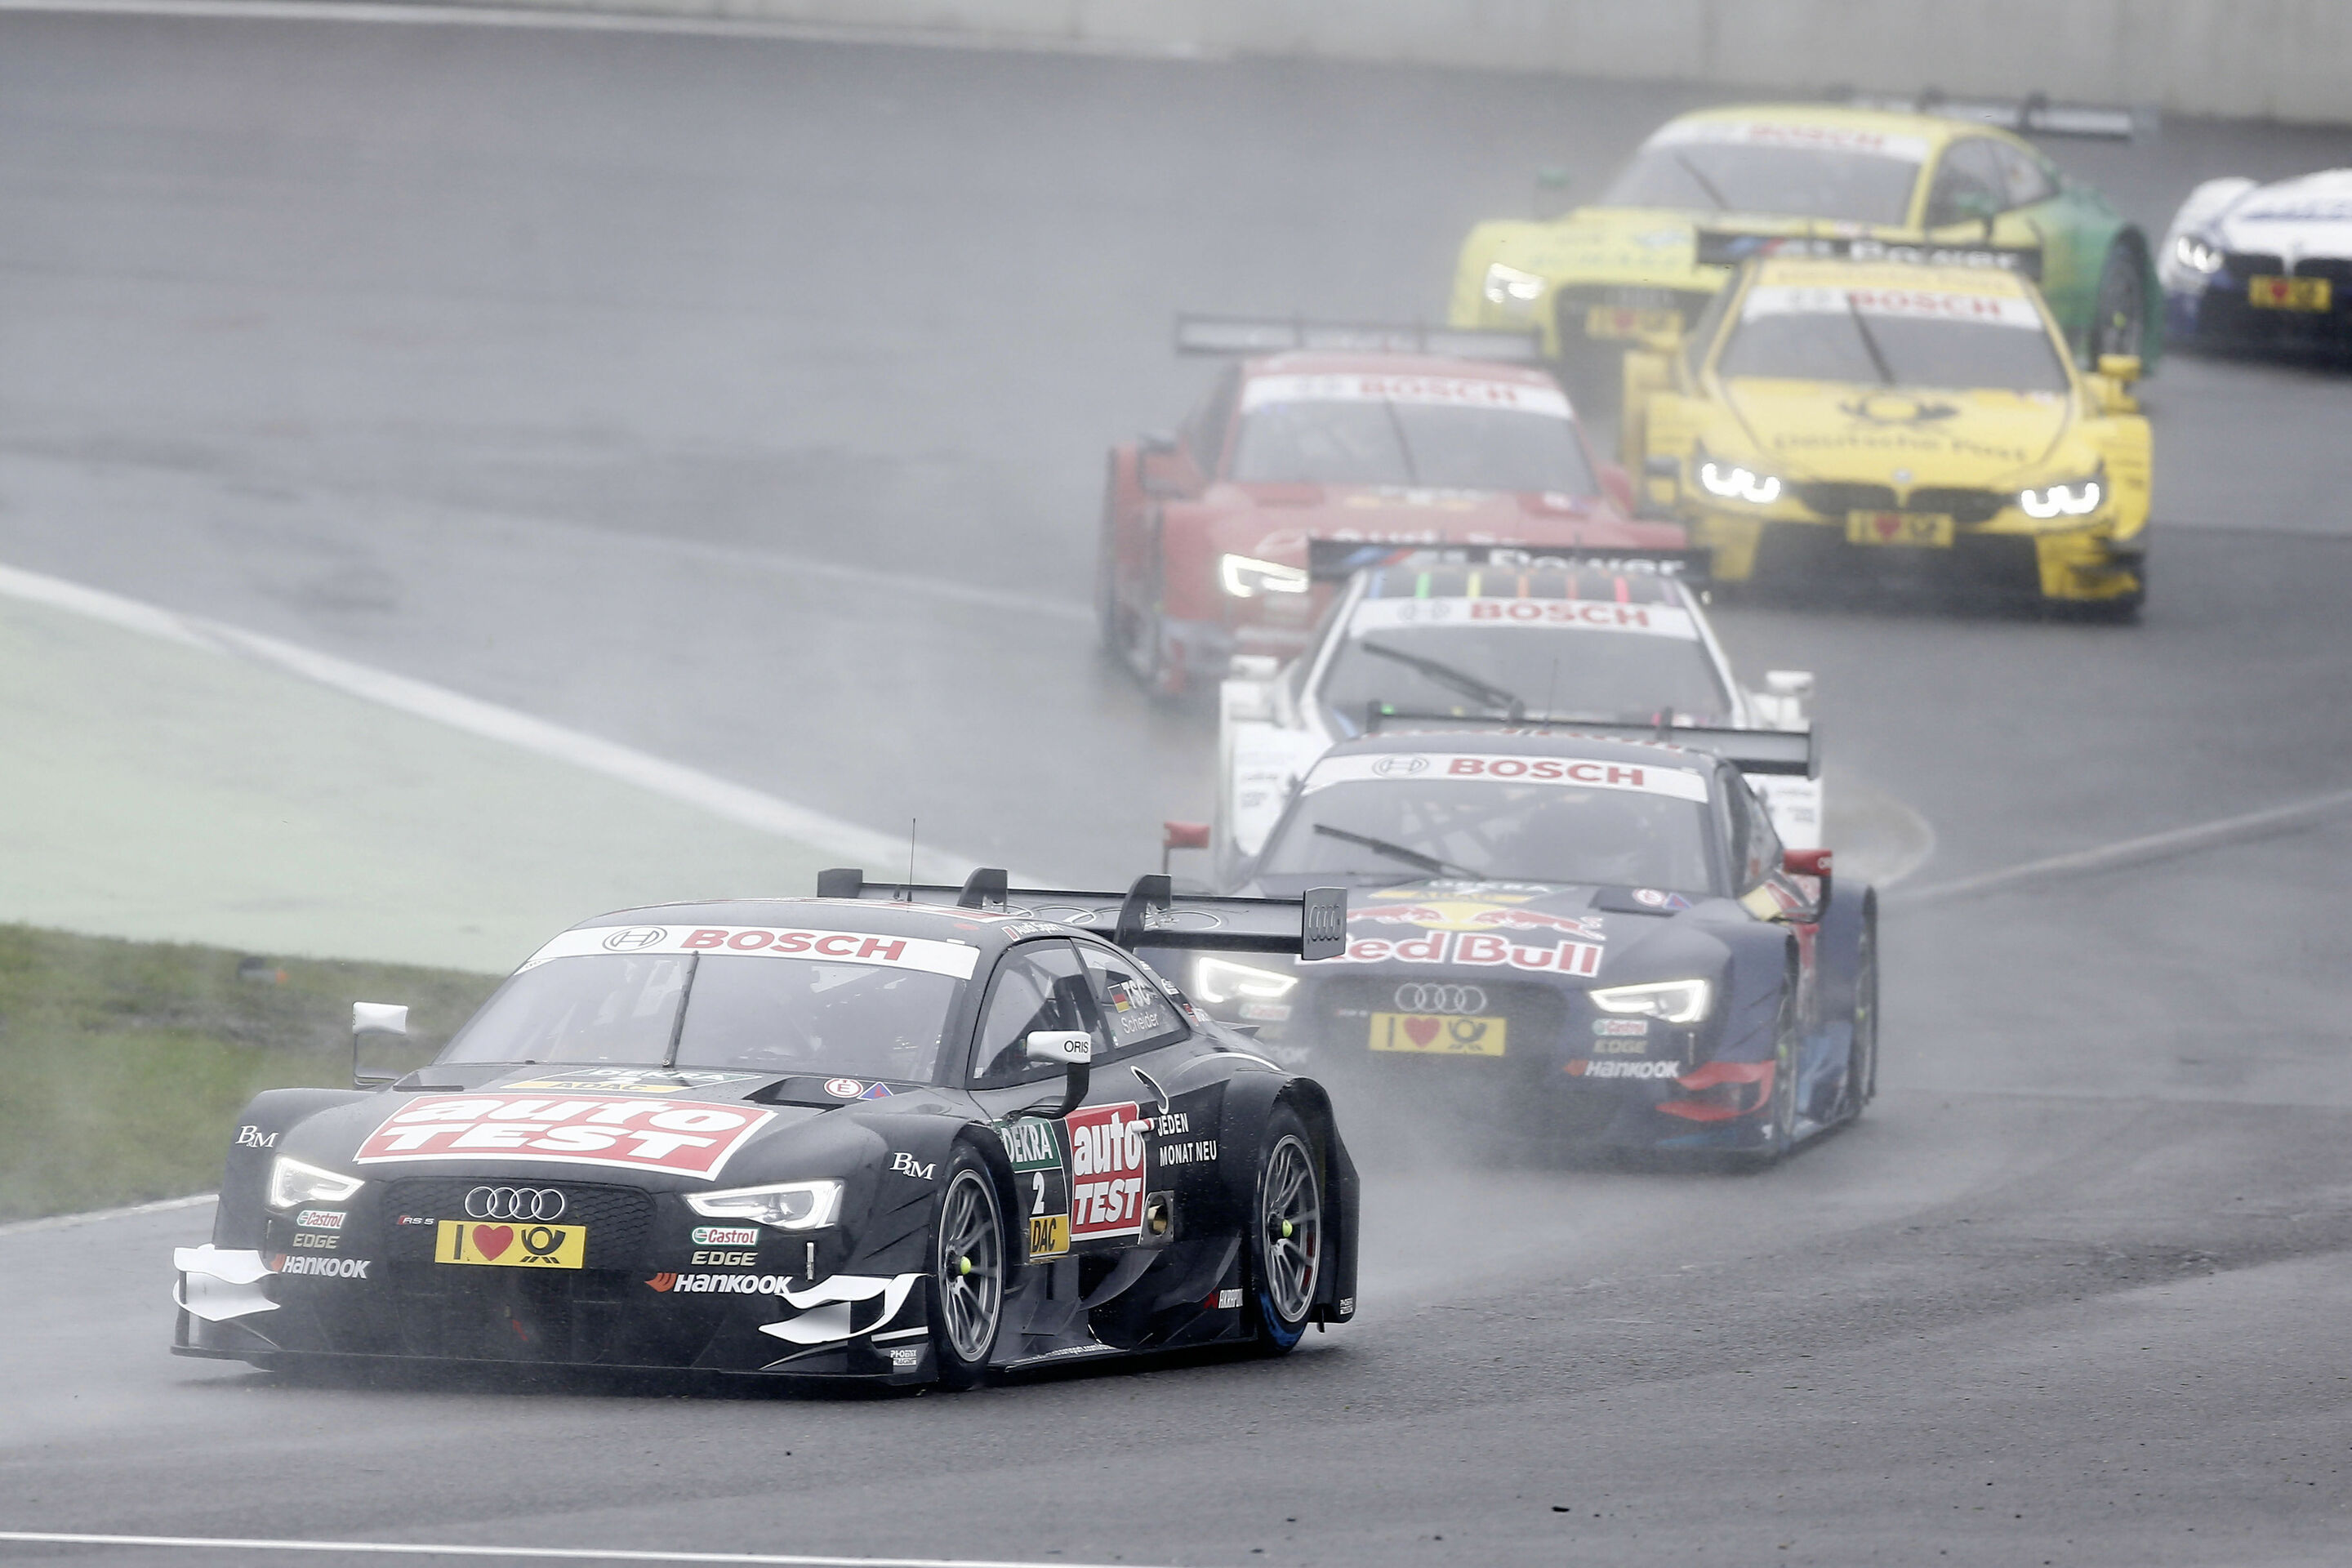 Quotes after the race at the Lausitzring